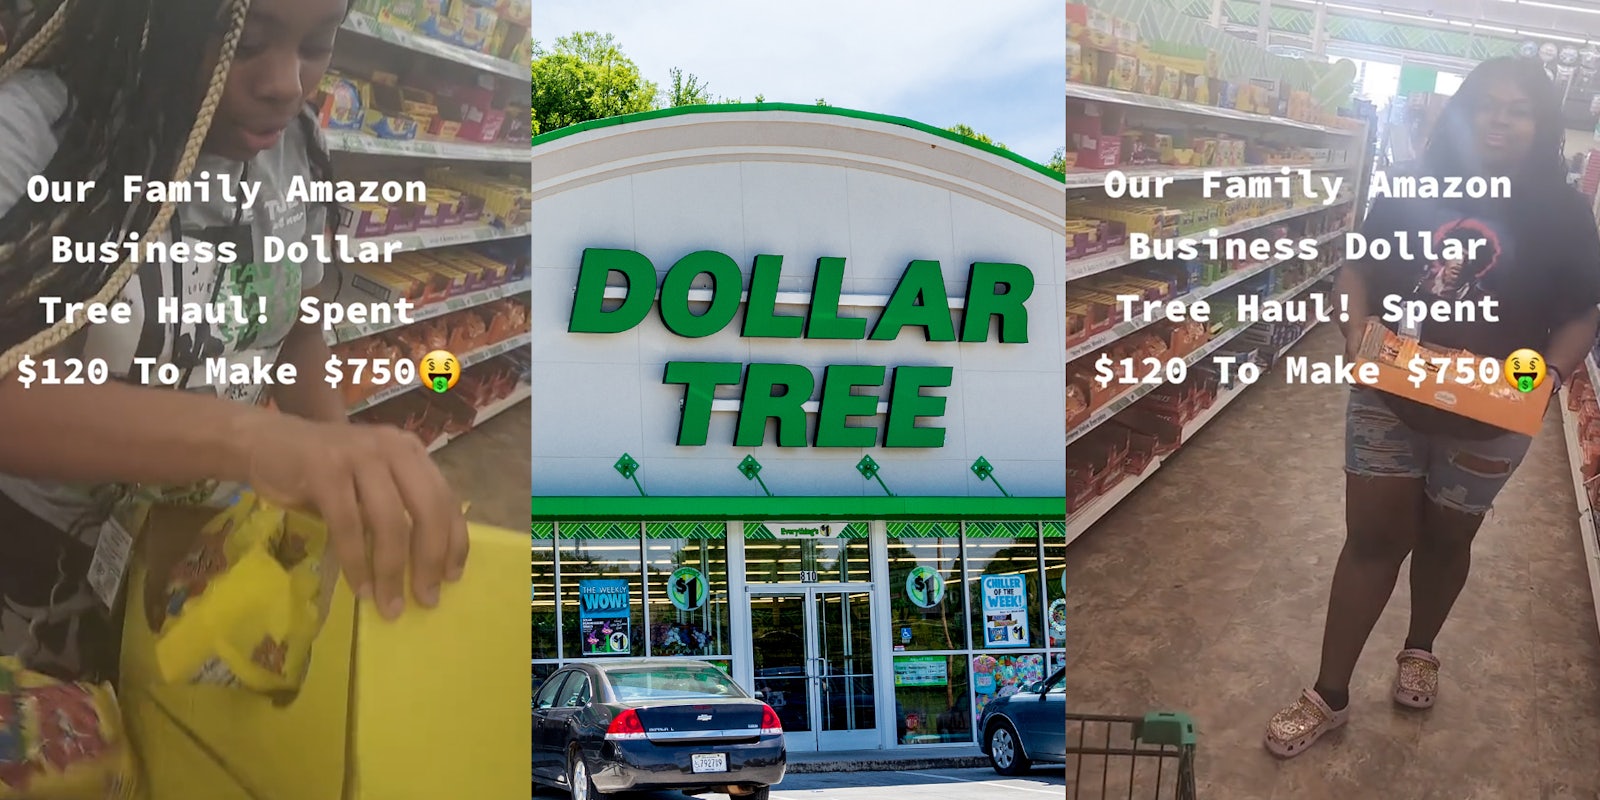 Amazon sellers spend buy items at Dollar Tree to resell on Amazon